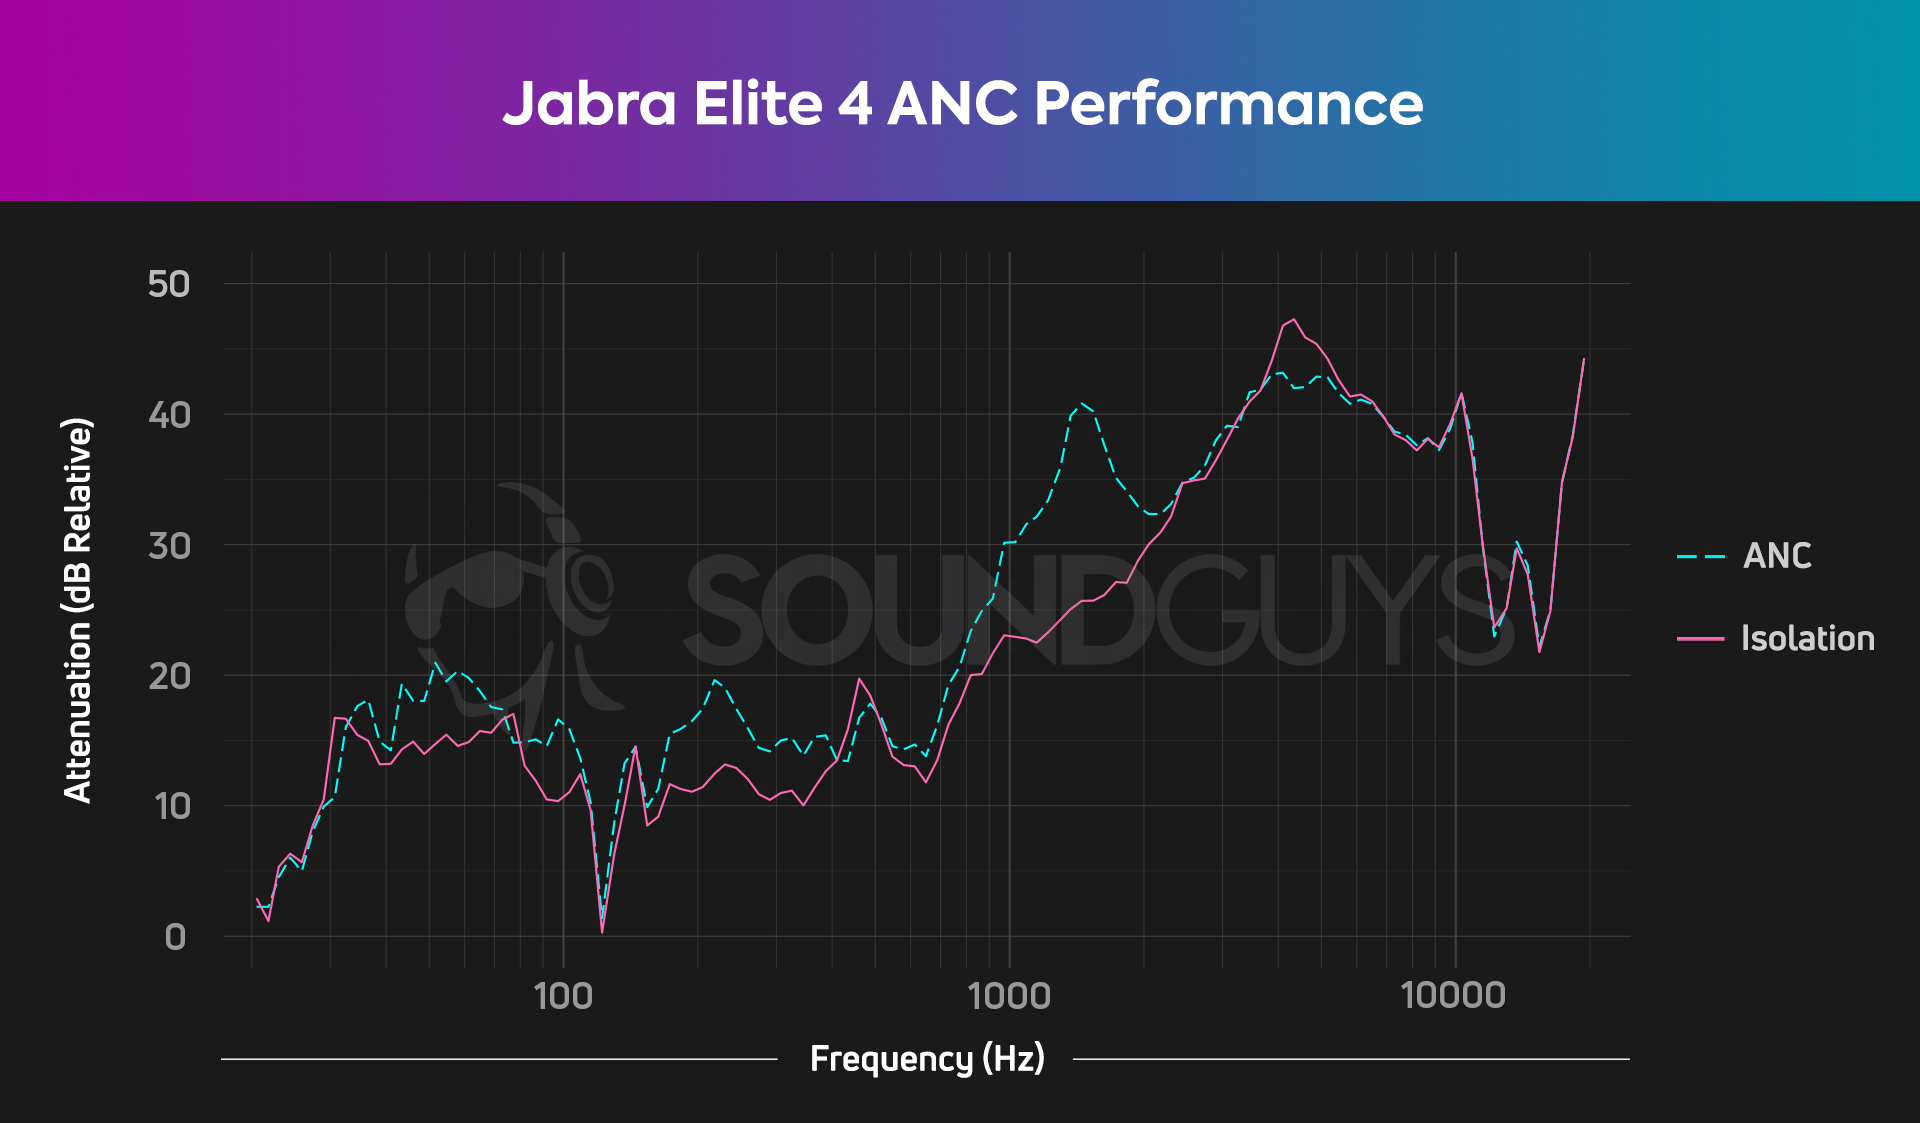 A chart shows the isolation and active noise canceling performance of the Jabra Elite 4.